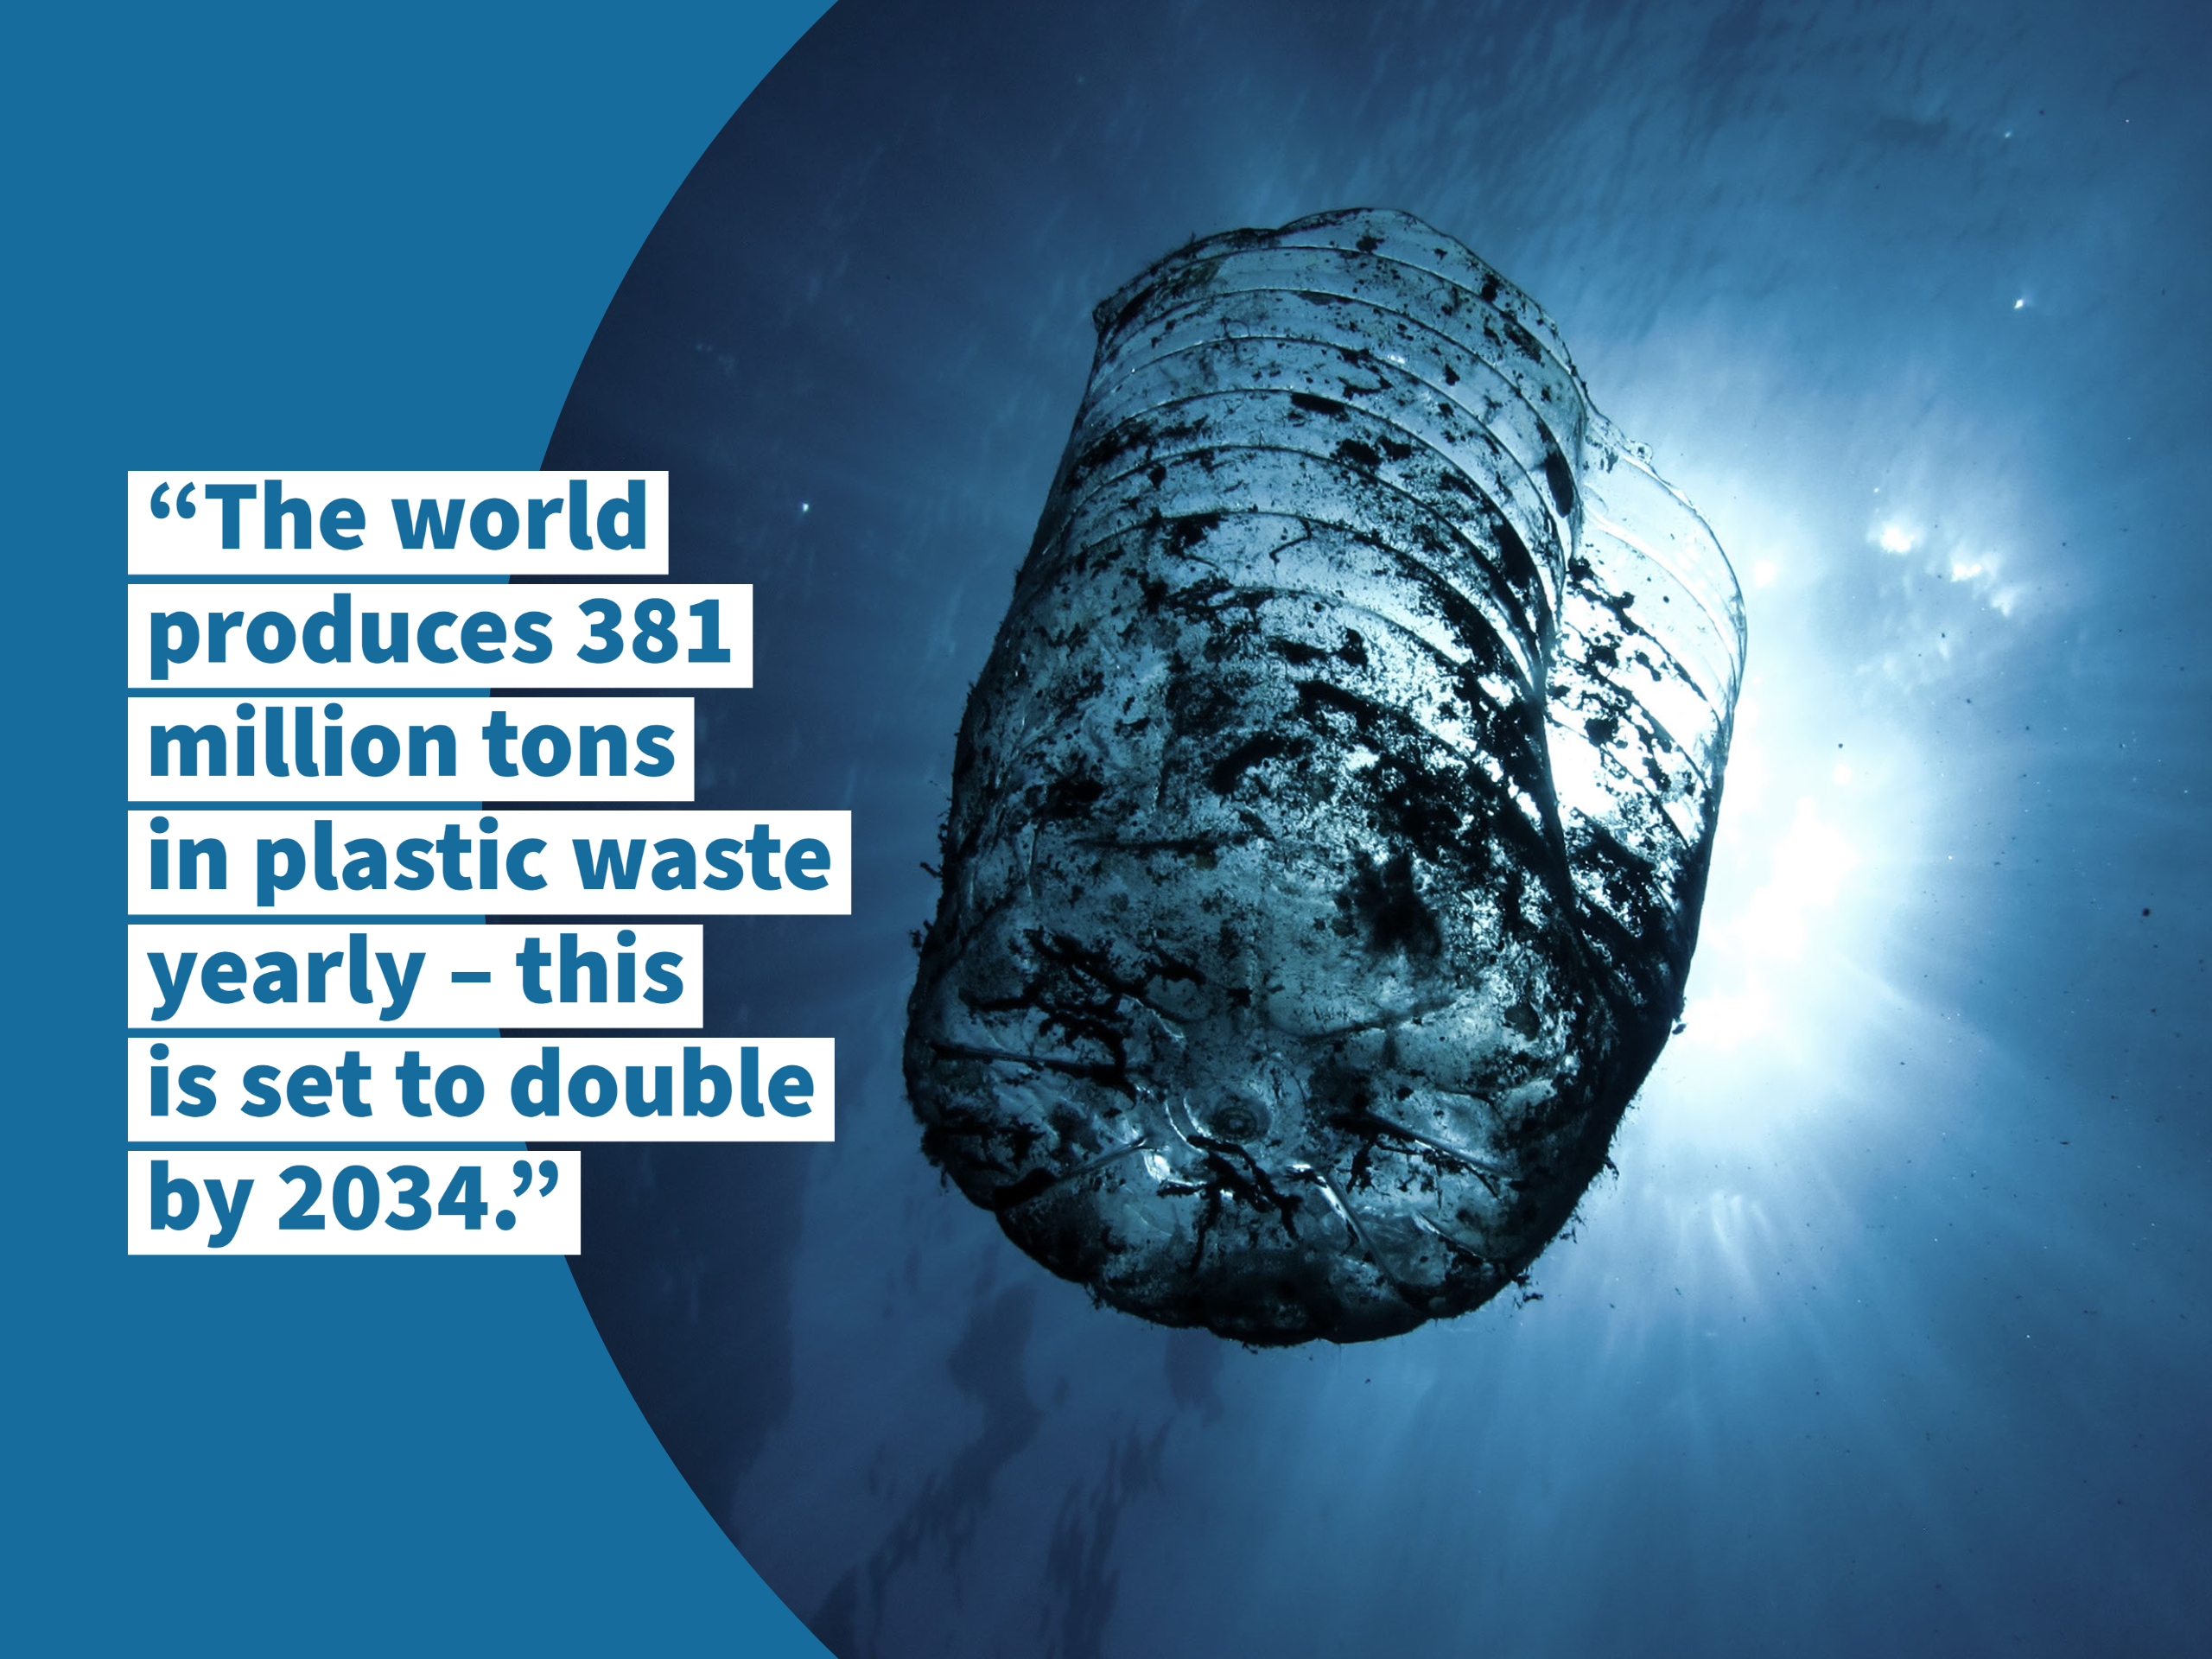  The world produces 381 million tons in plastic yearly - this is set to double by 2034!